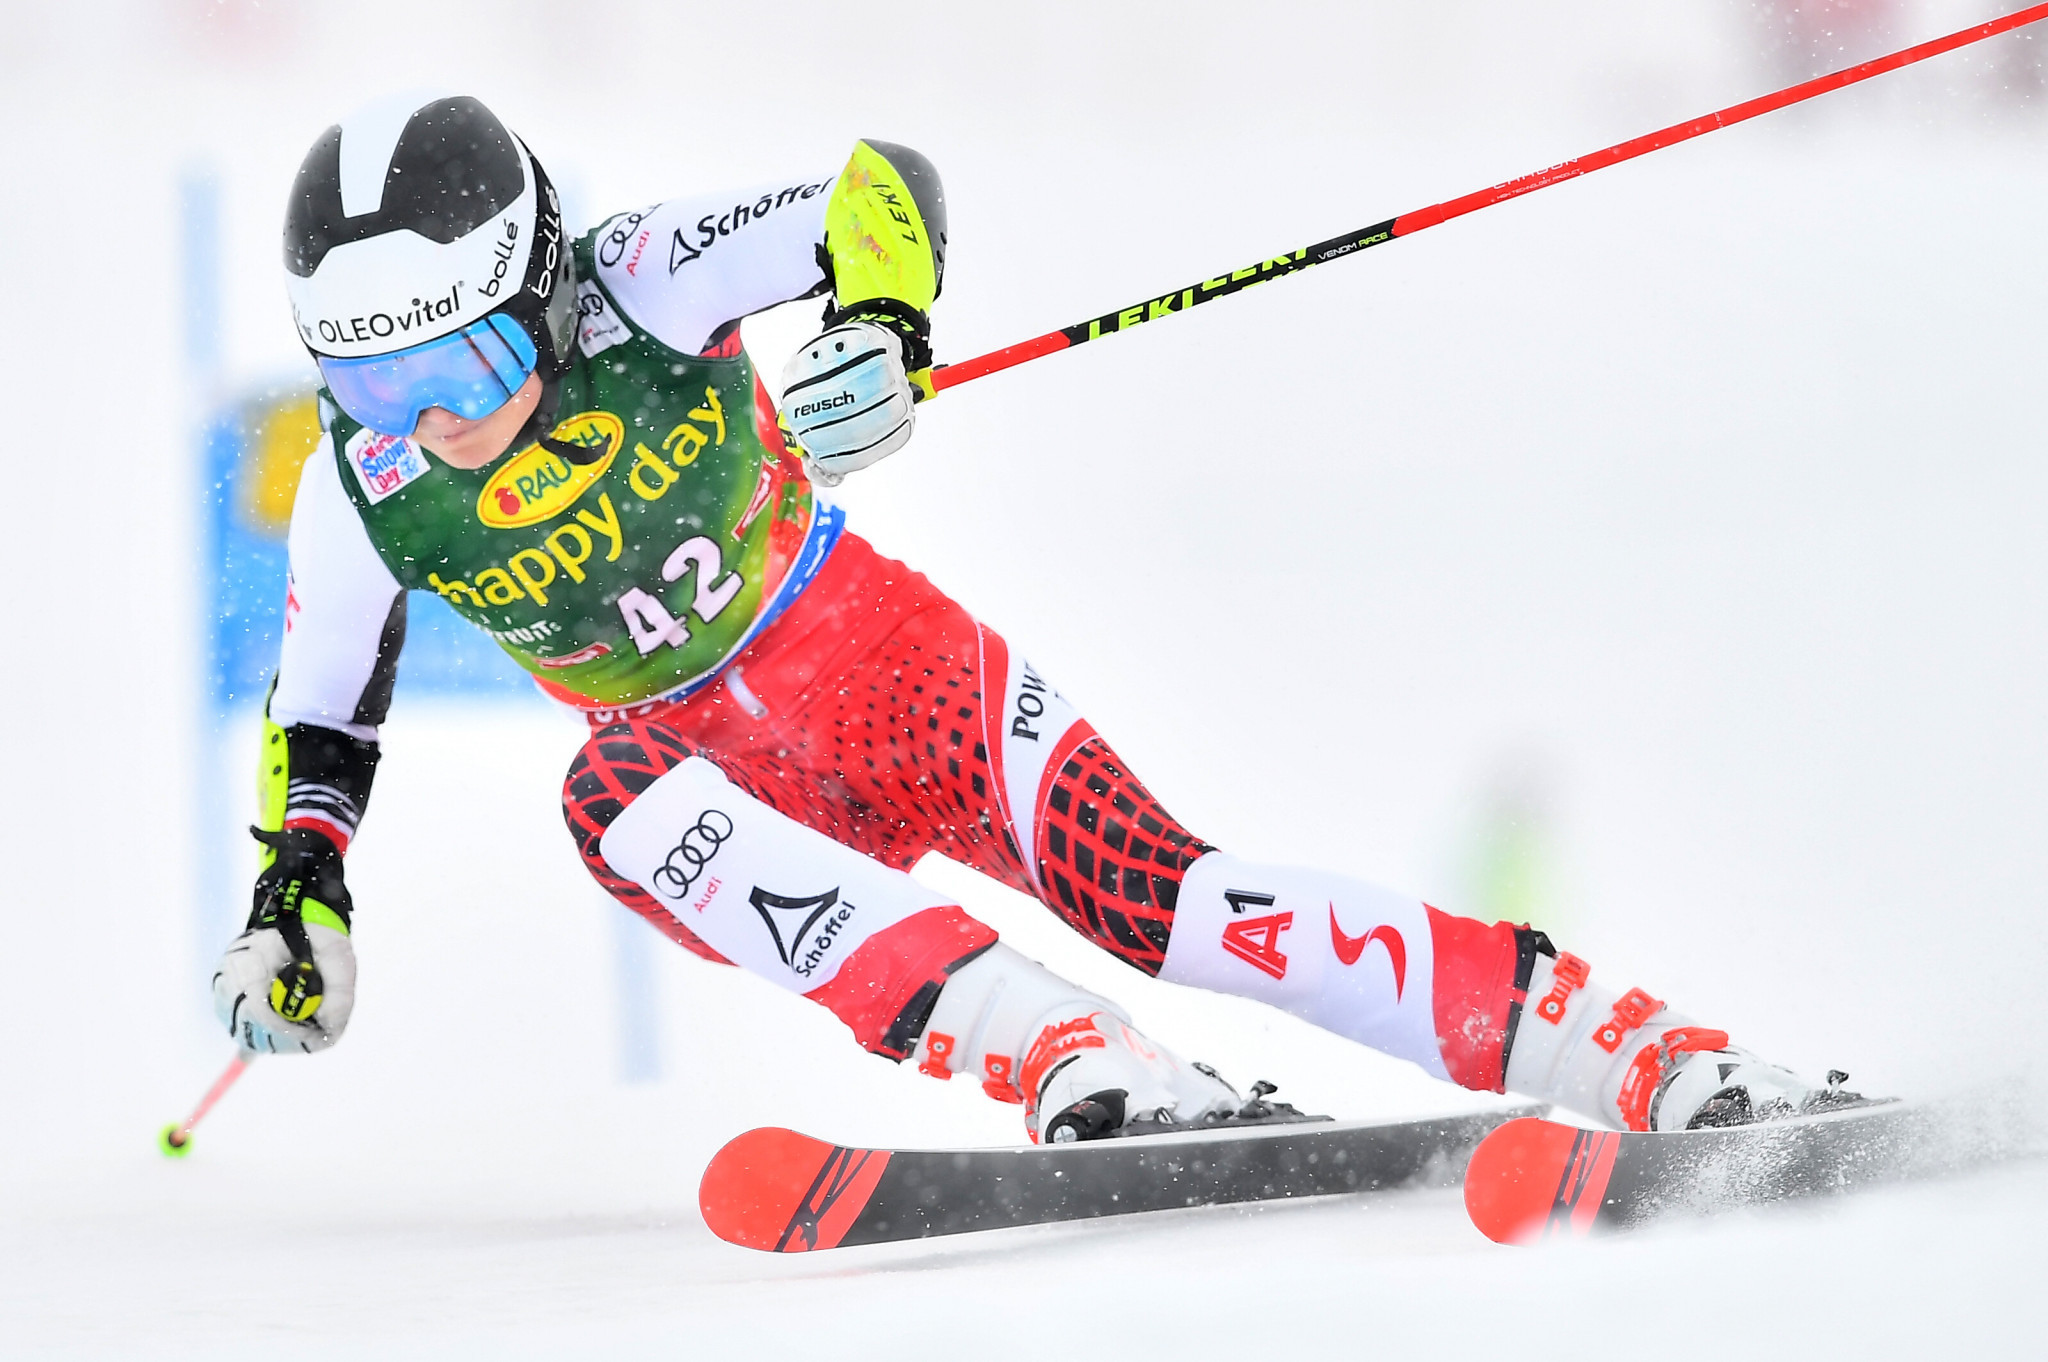 Gold and silver for Norway on day of women's action at World Junior Alpine Skiing Championships